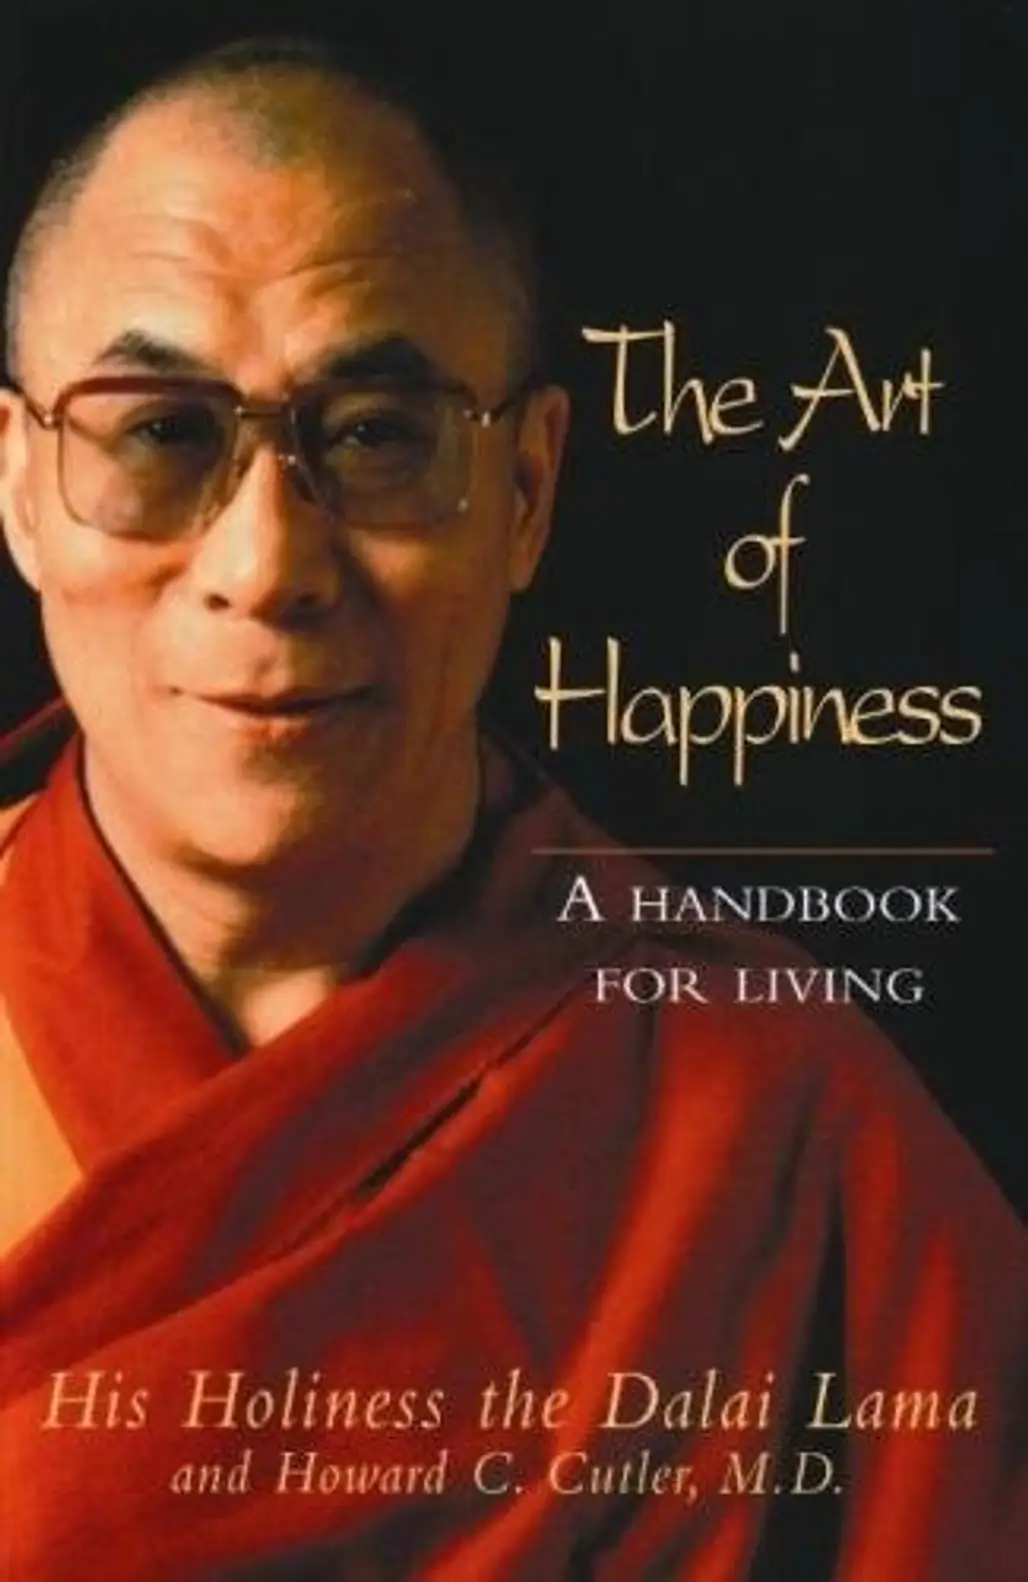 The Art of Happiness by the Dalai Lama and Dr Howard Cutler